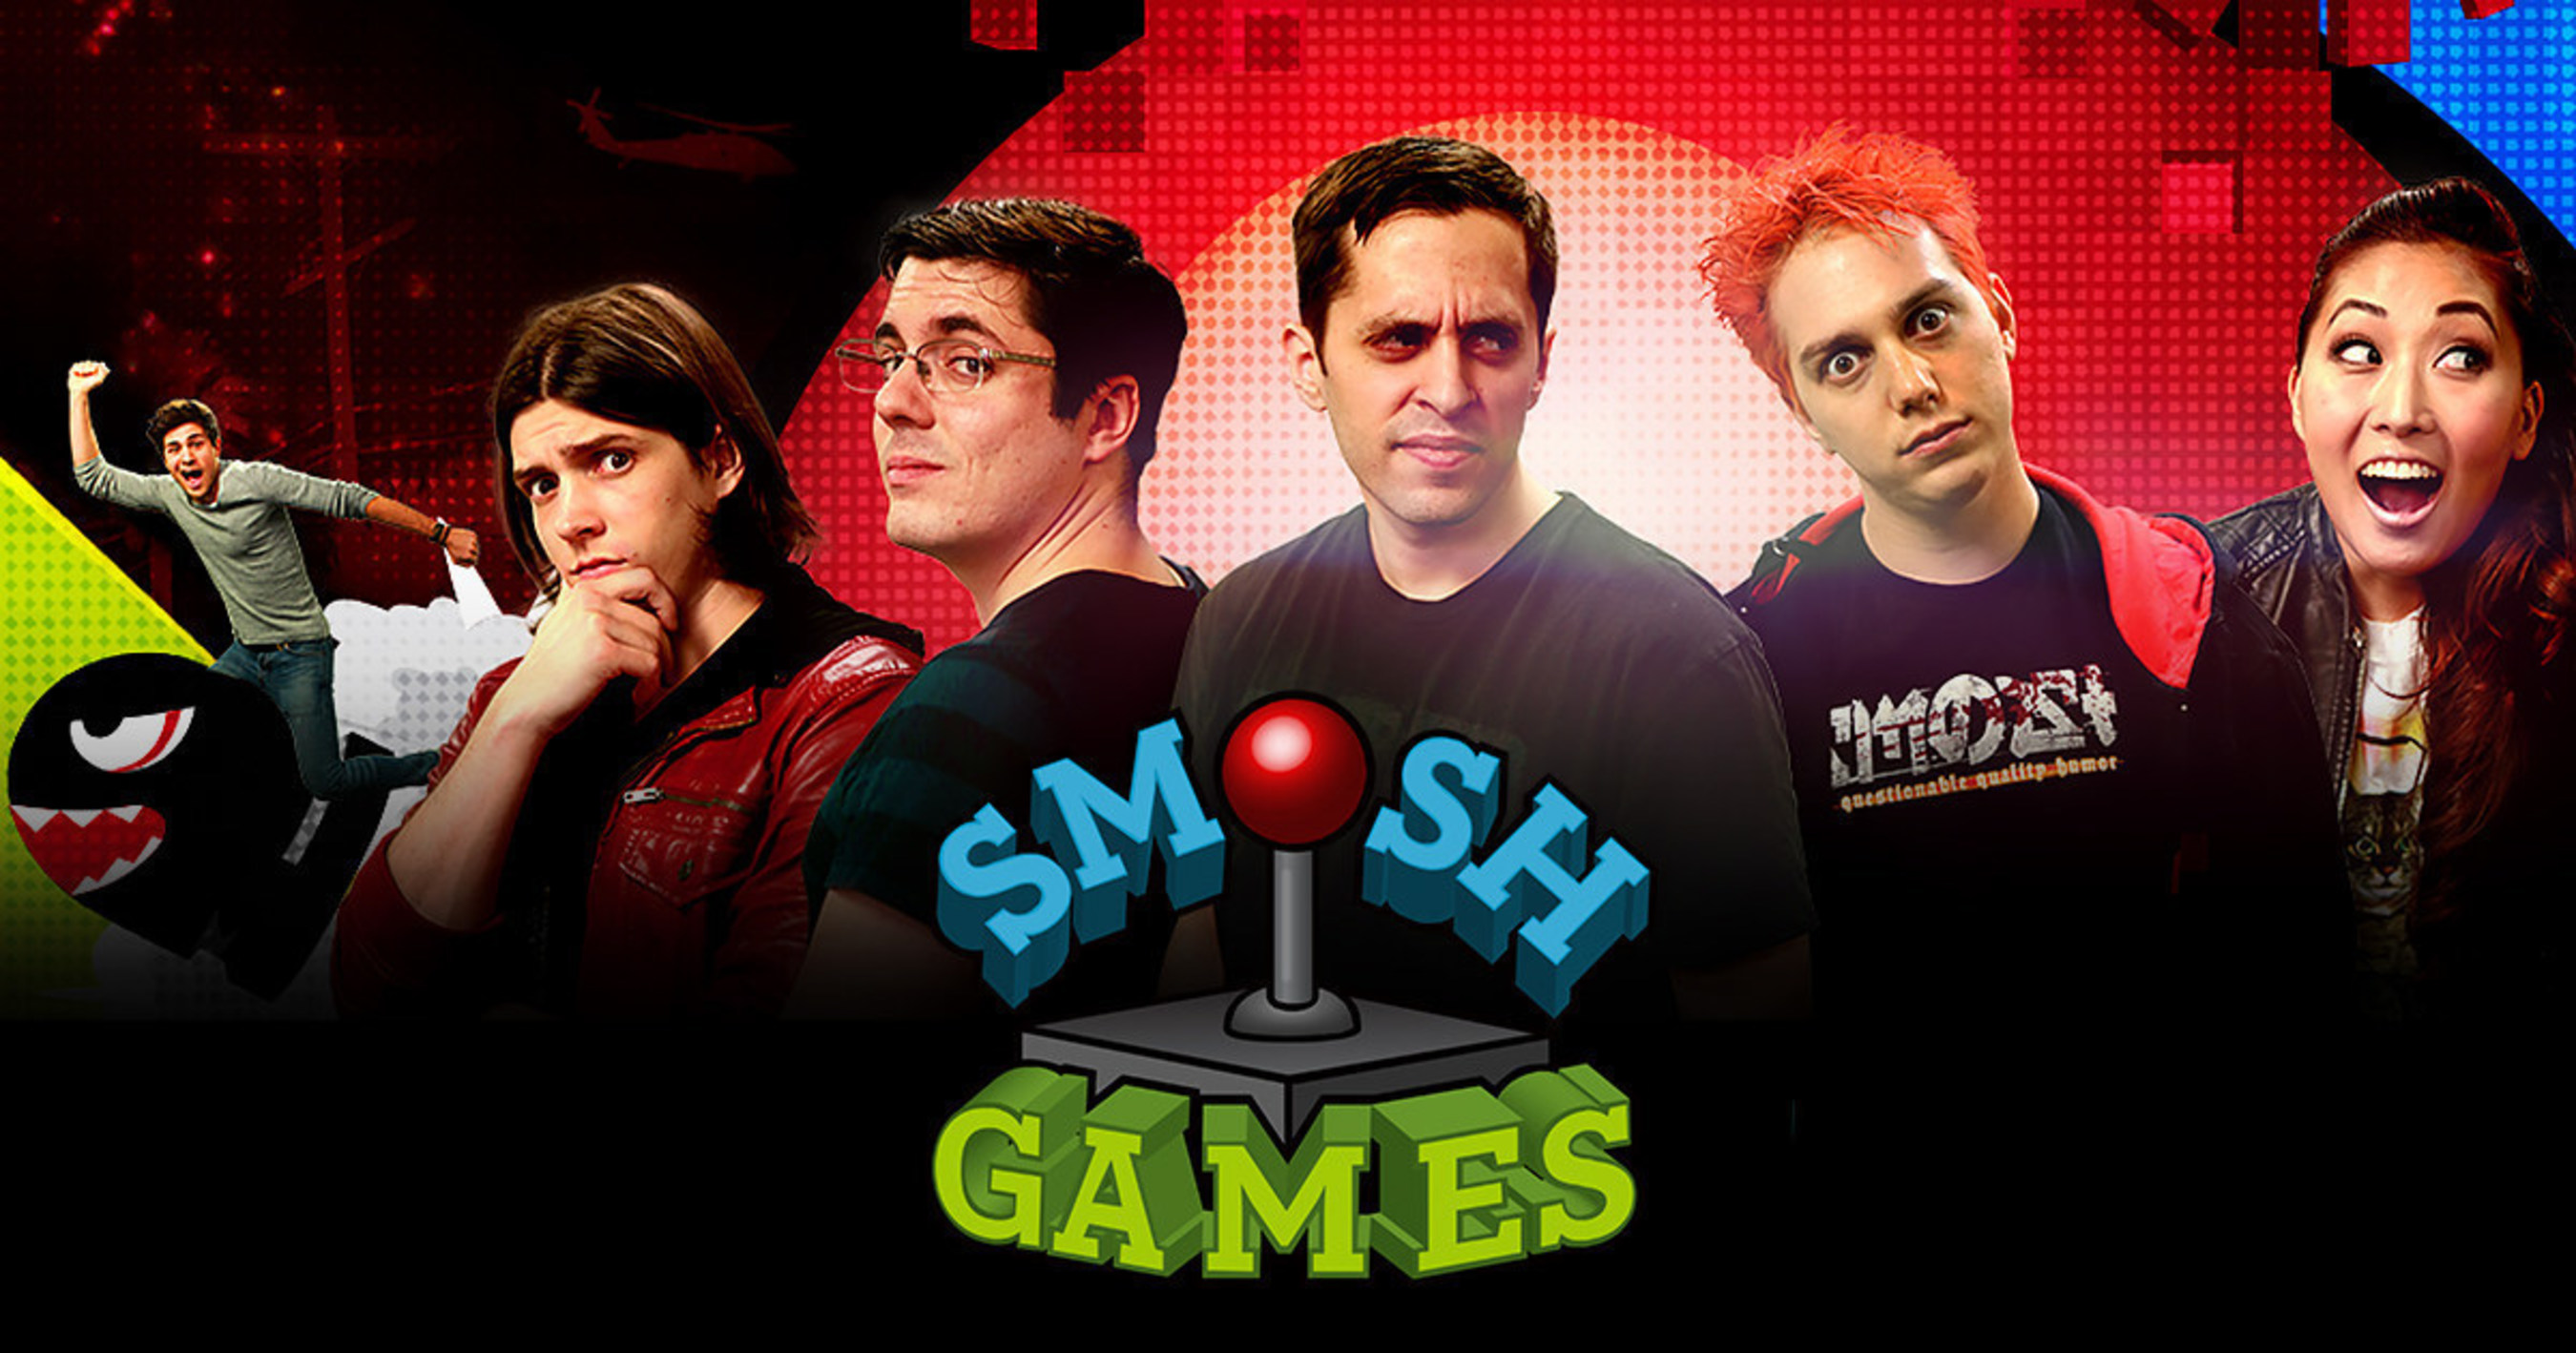 Viewster now offers content from web heavyweight DEFY Media including the smash hit SMOSH Games